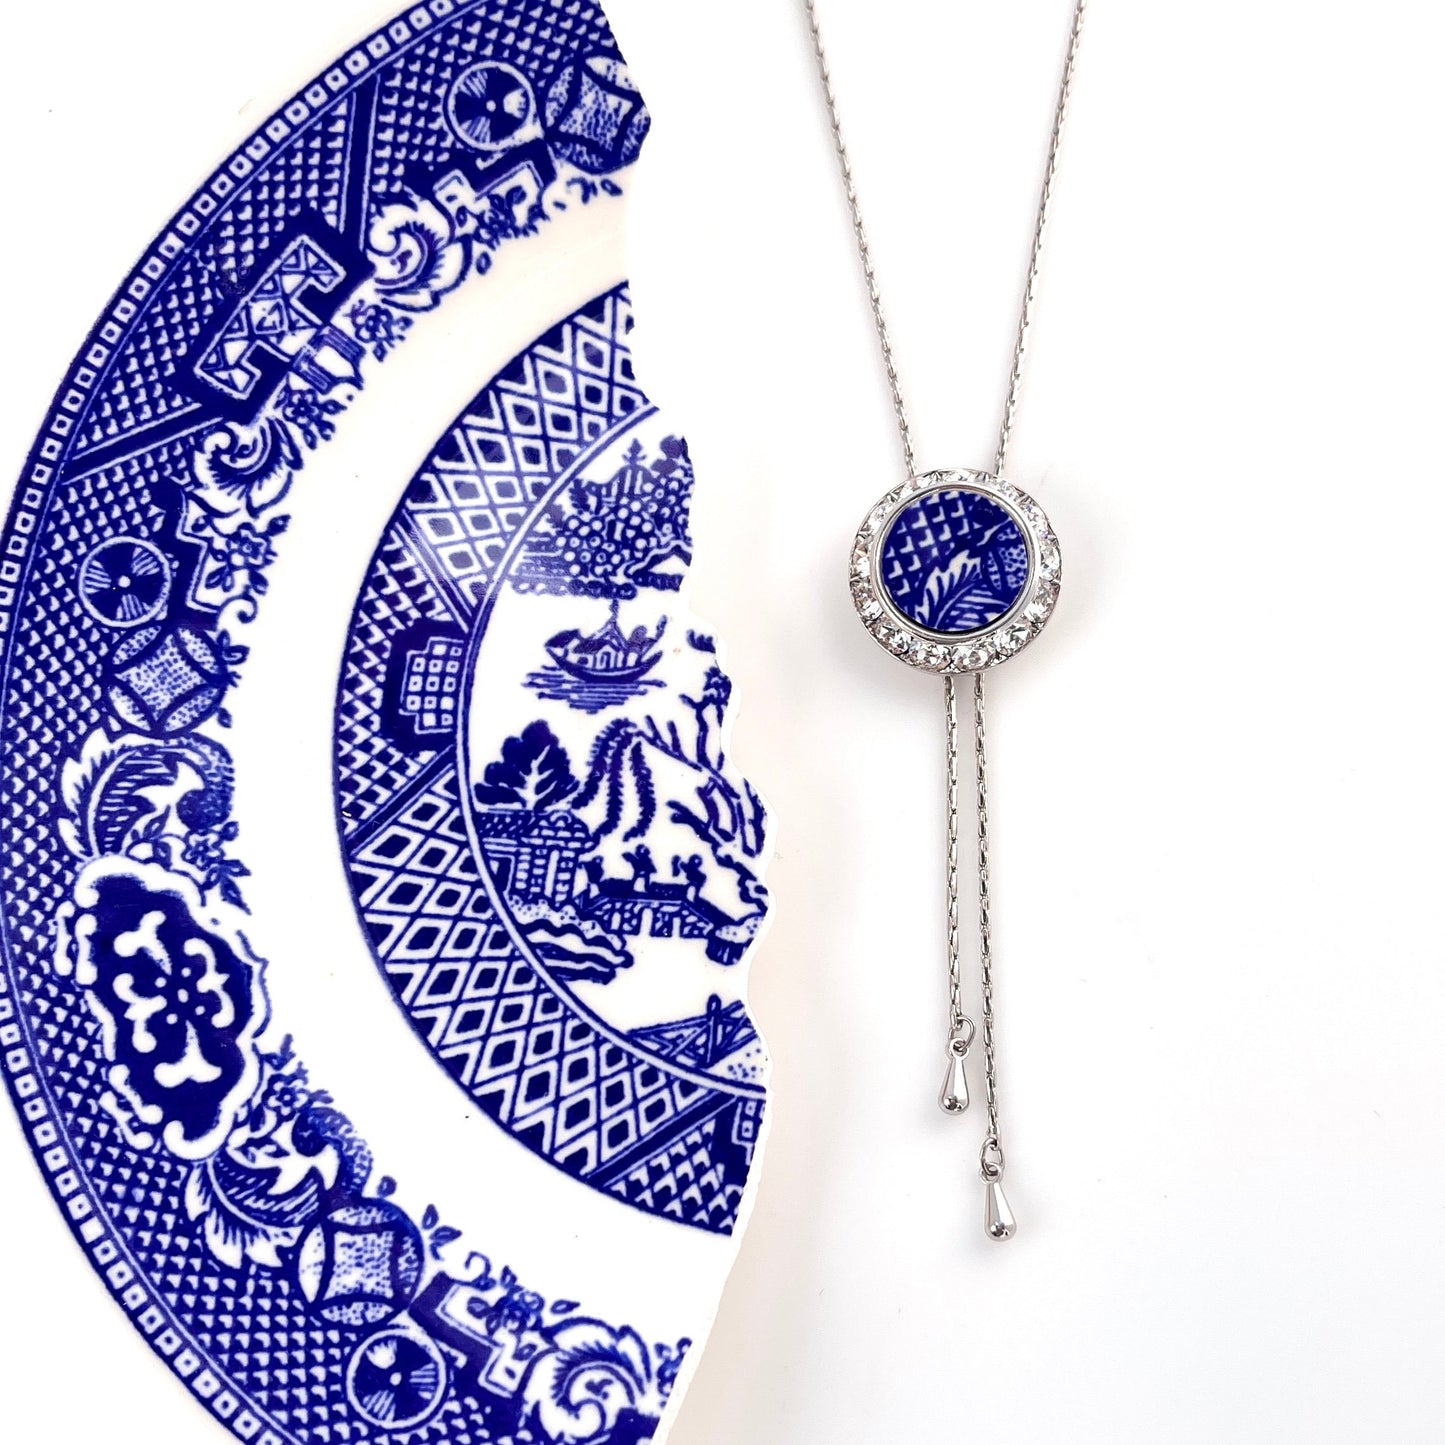 Adjustable Blue Willow Lariat Necklace, Crystal Bolo Tie, Broken China Jewelry, Unique Gift for Mom